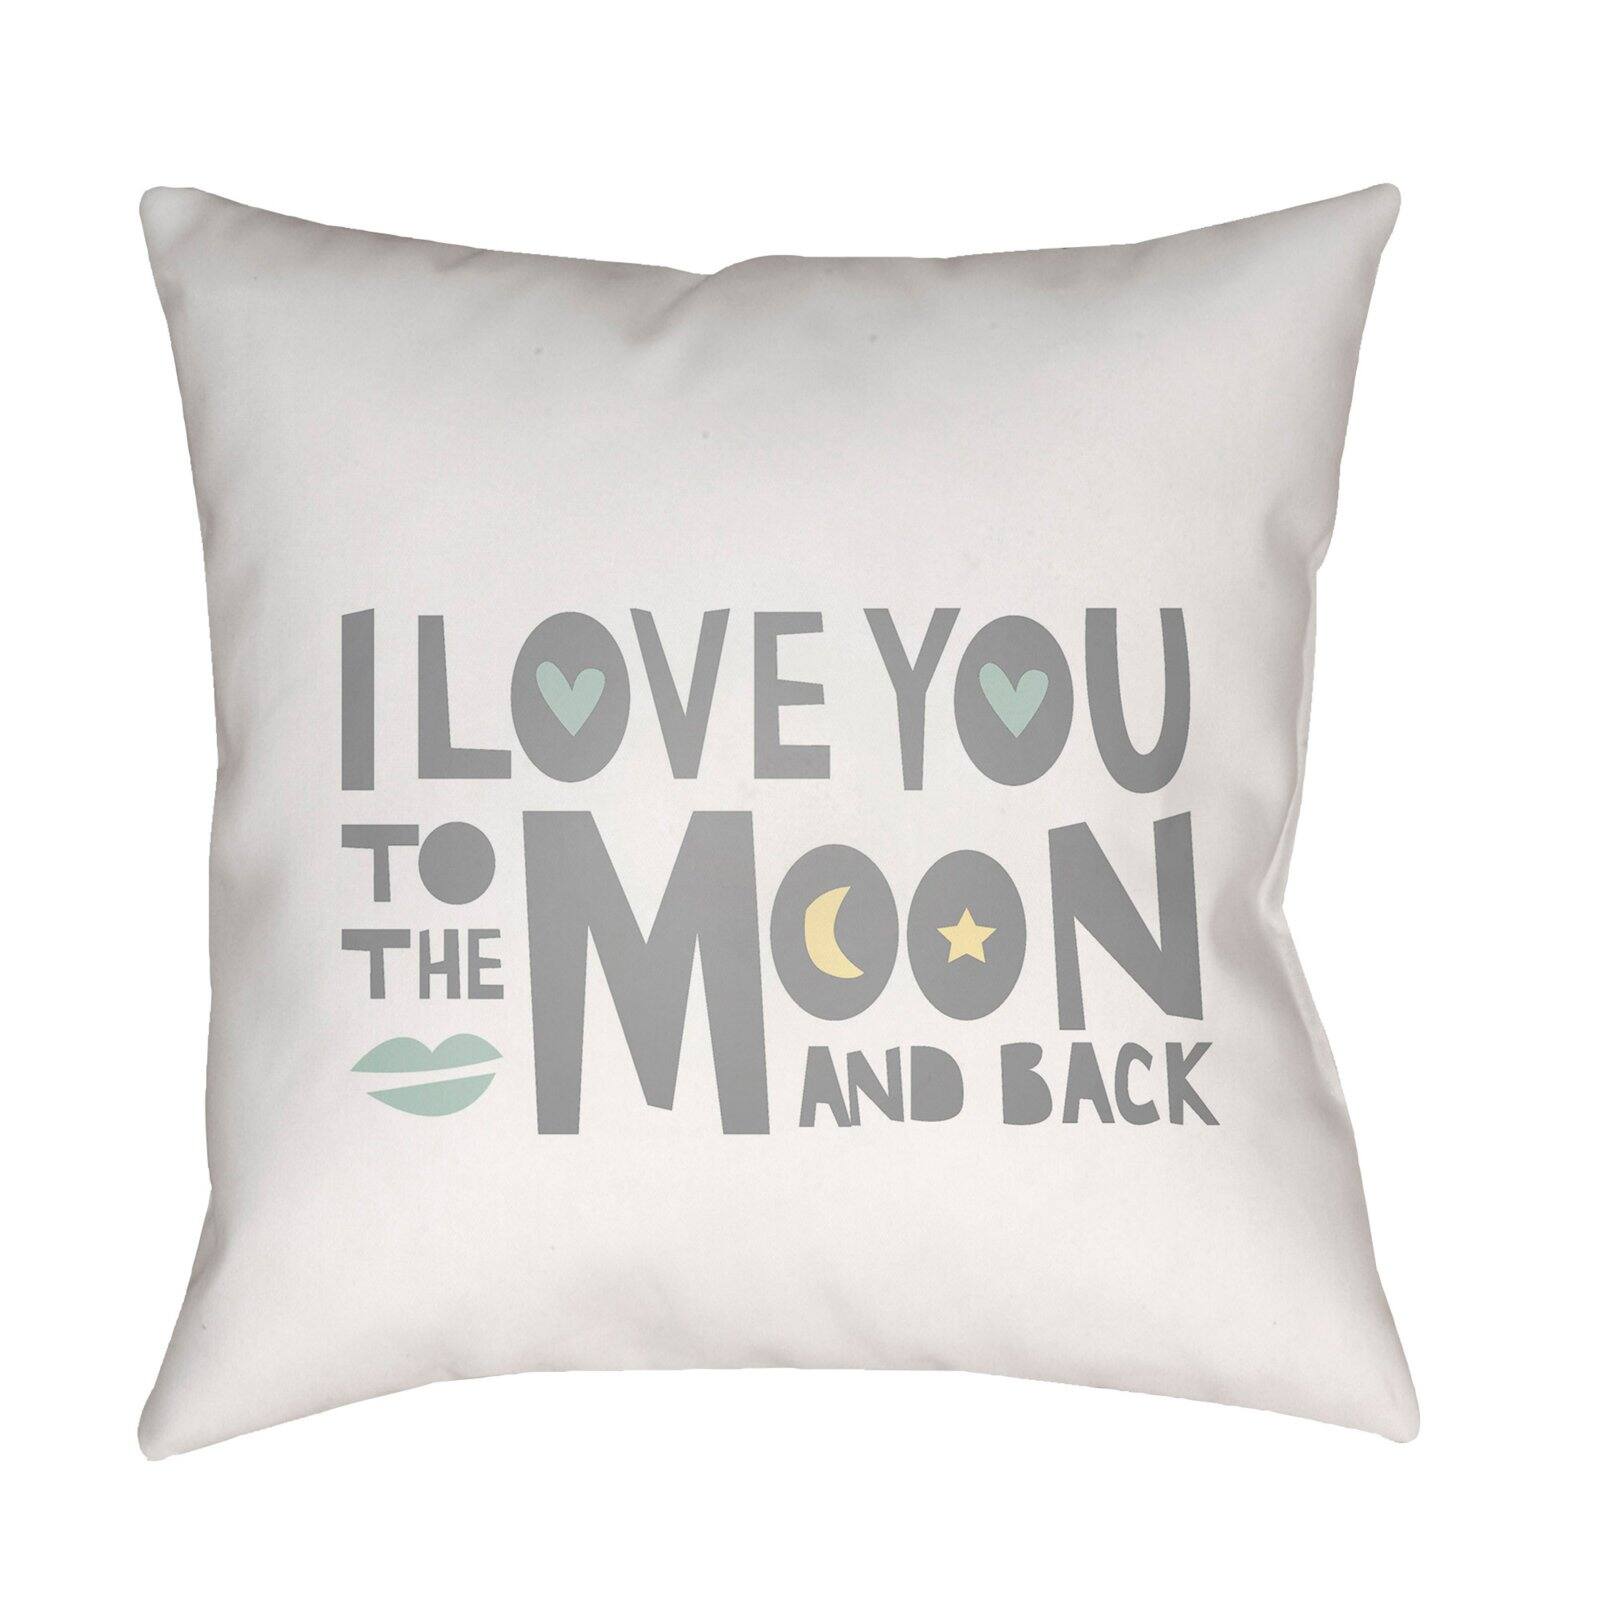 Surya Love To Moon Outdoor Pillow - image 1 of 1